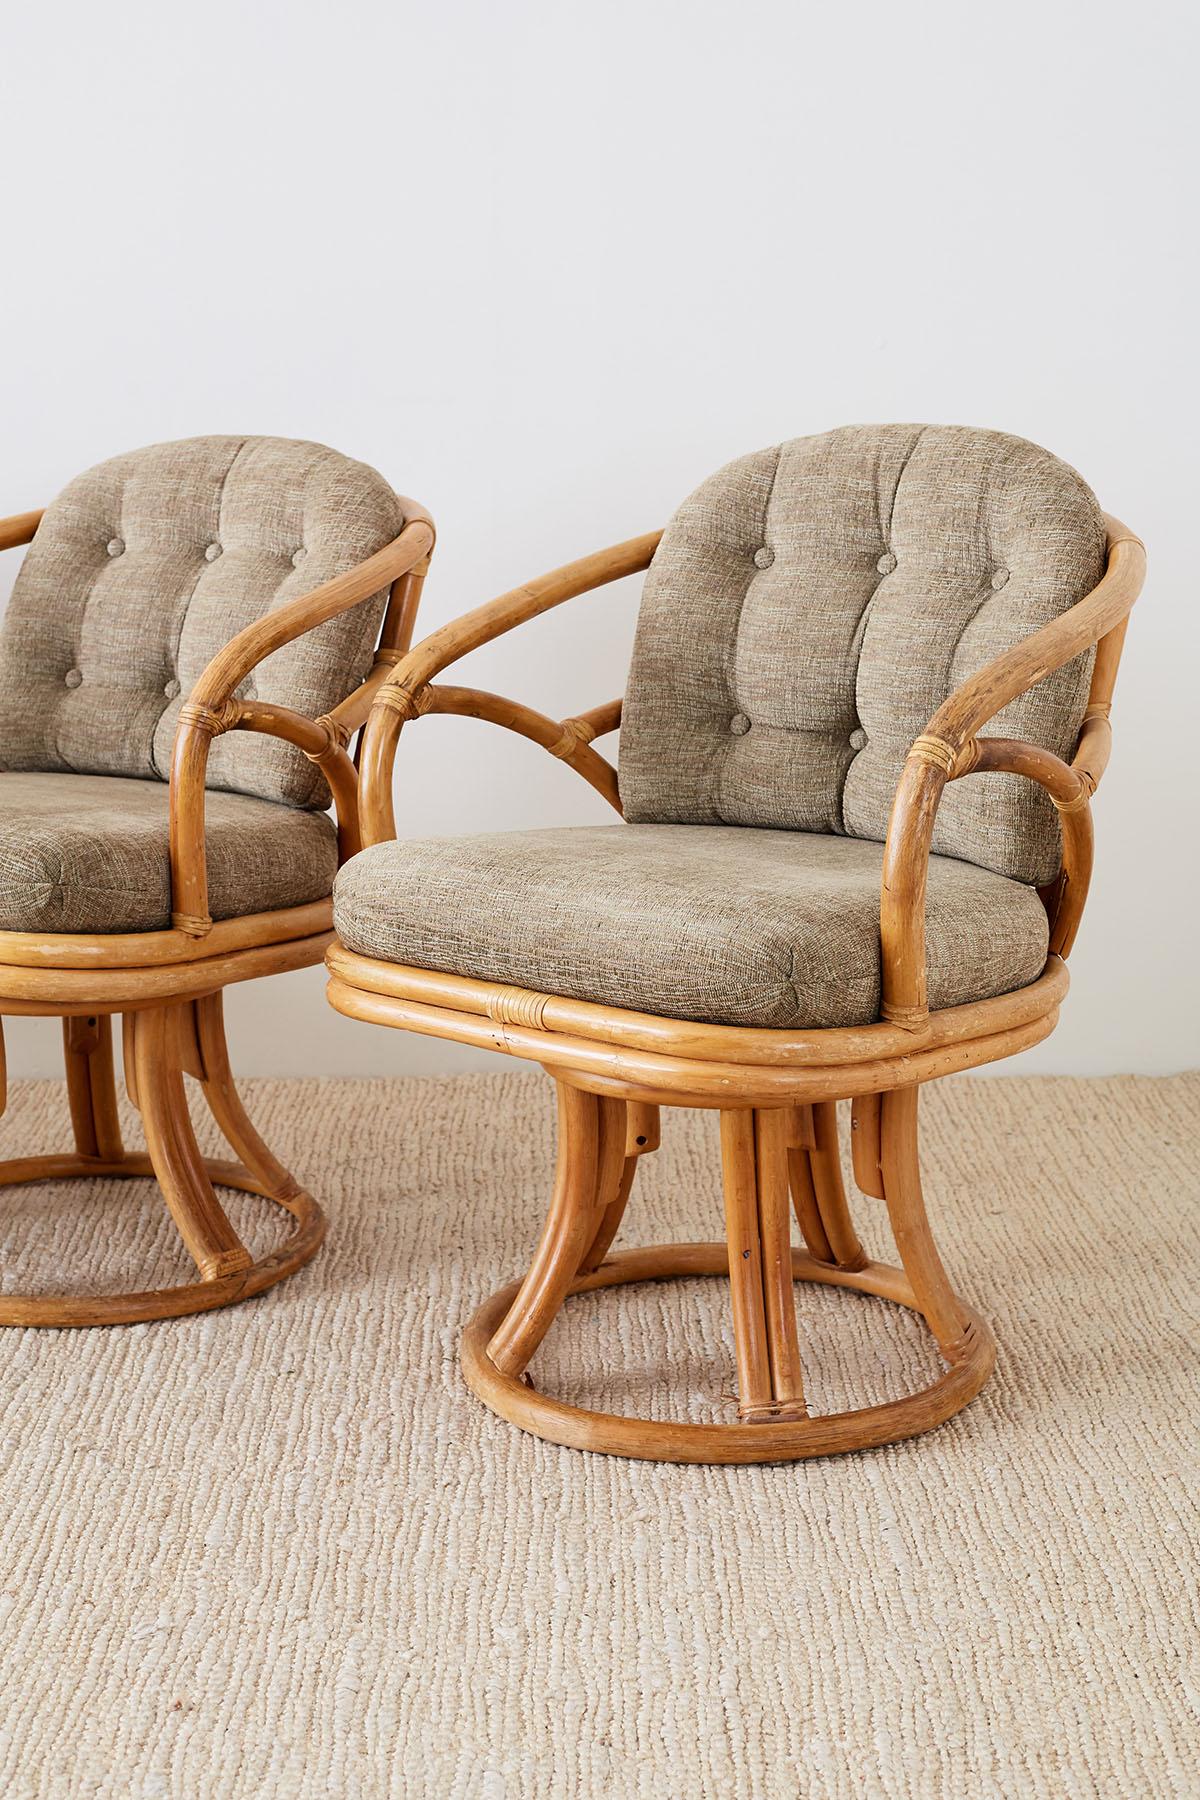 American Set of Four McGuire Bamboo Rattan Swivel Armchairs